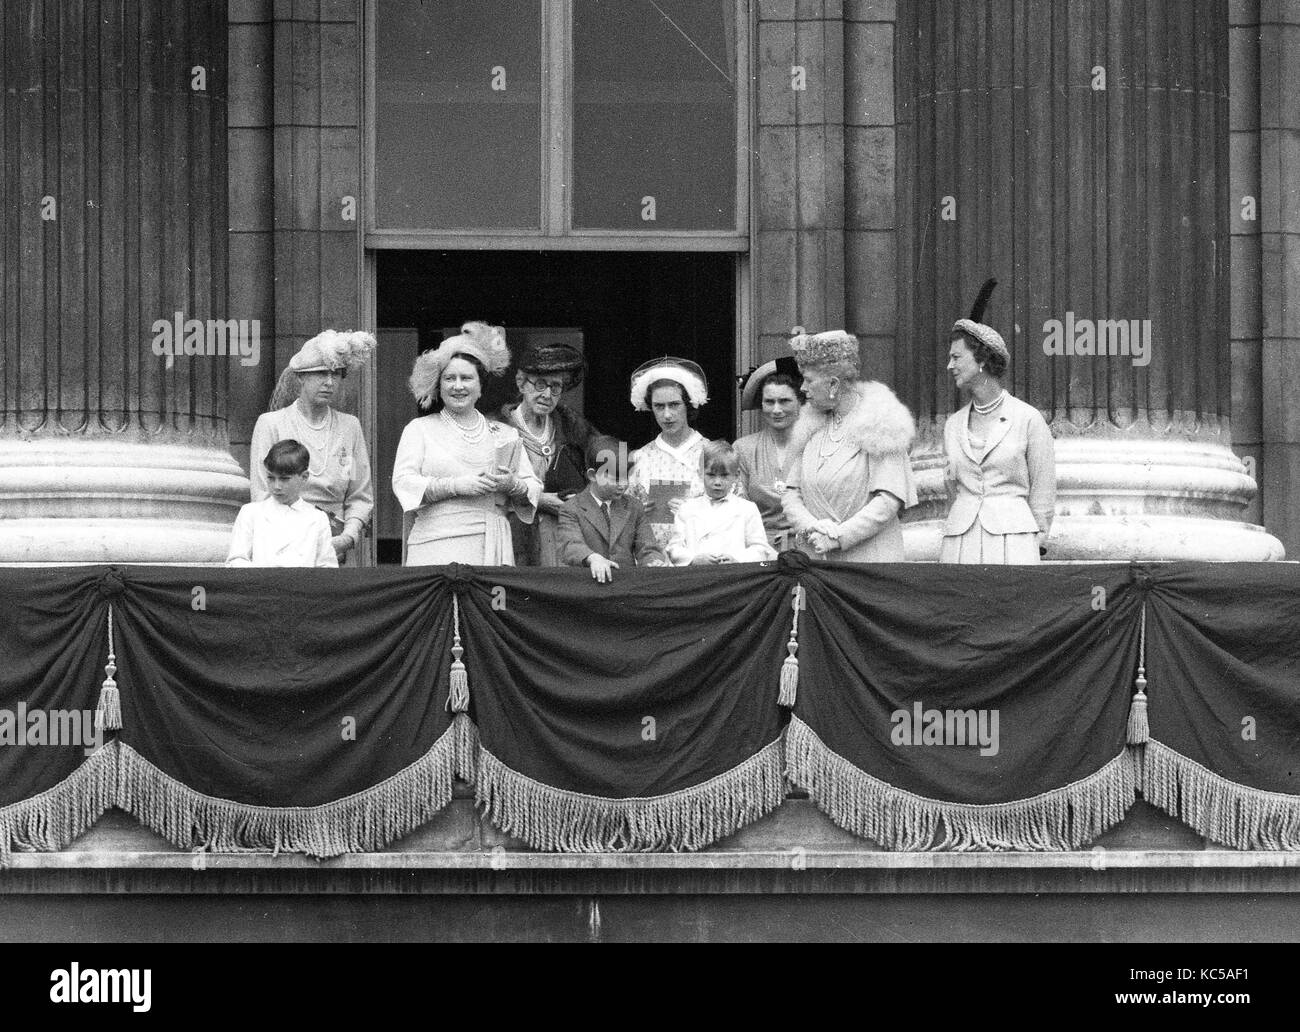 Royal family on the balcony of Buckingham Palace including Queen The British royal family on the balcony of Buckingham Palace. Elizabeth the Queen Mother, Princess Marie Louise (grand daughter of Queen Victoria), Princess Margaret, Queen Mary, Duchess of Gloucester. The children are Prince Richard, Prince William, Prince Michael of Kent June 9th 1949 Stock Photo